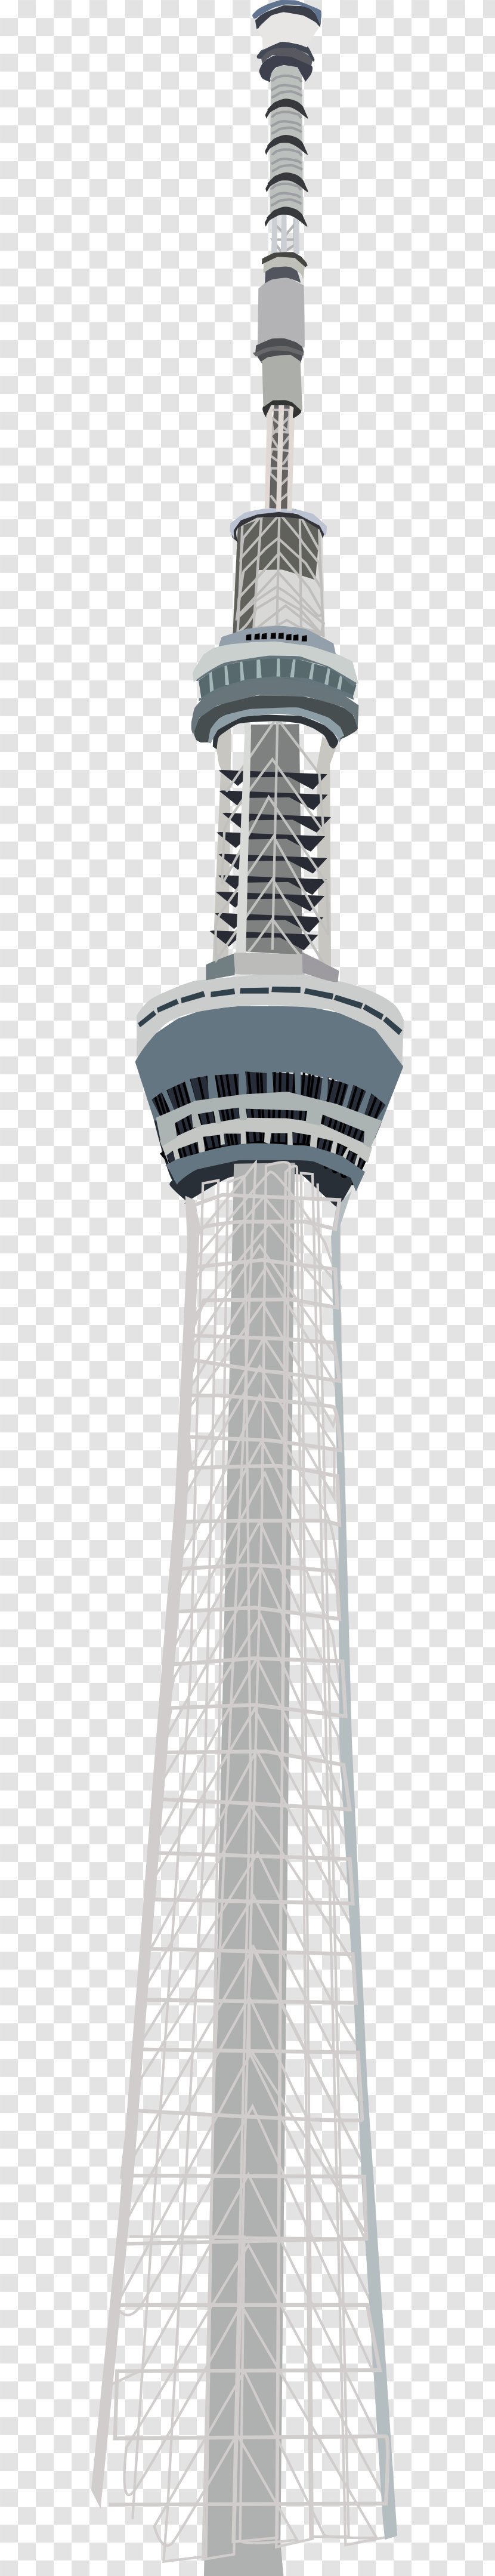 Tokyo Skytree Tower Transparent PNG